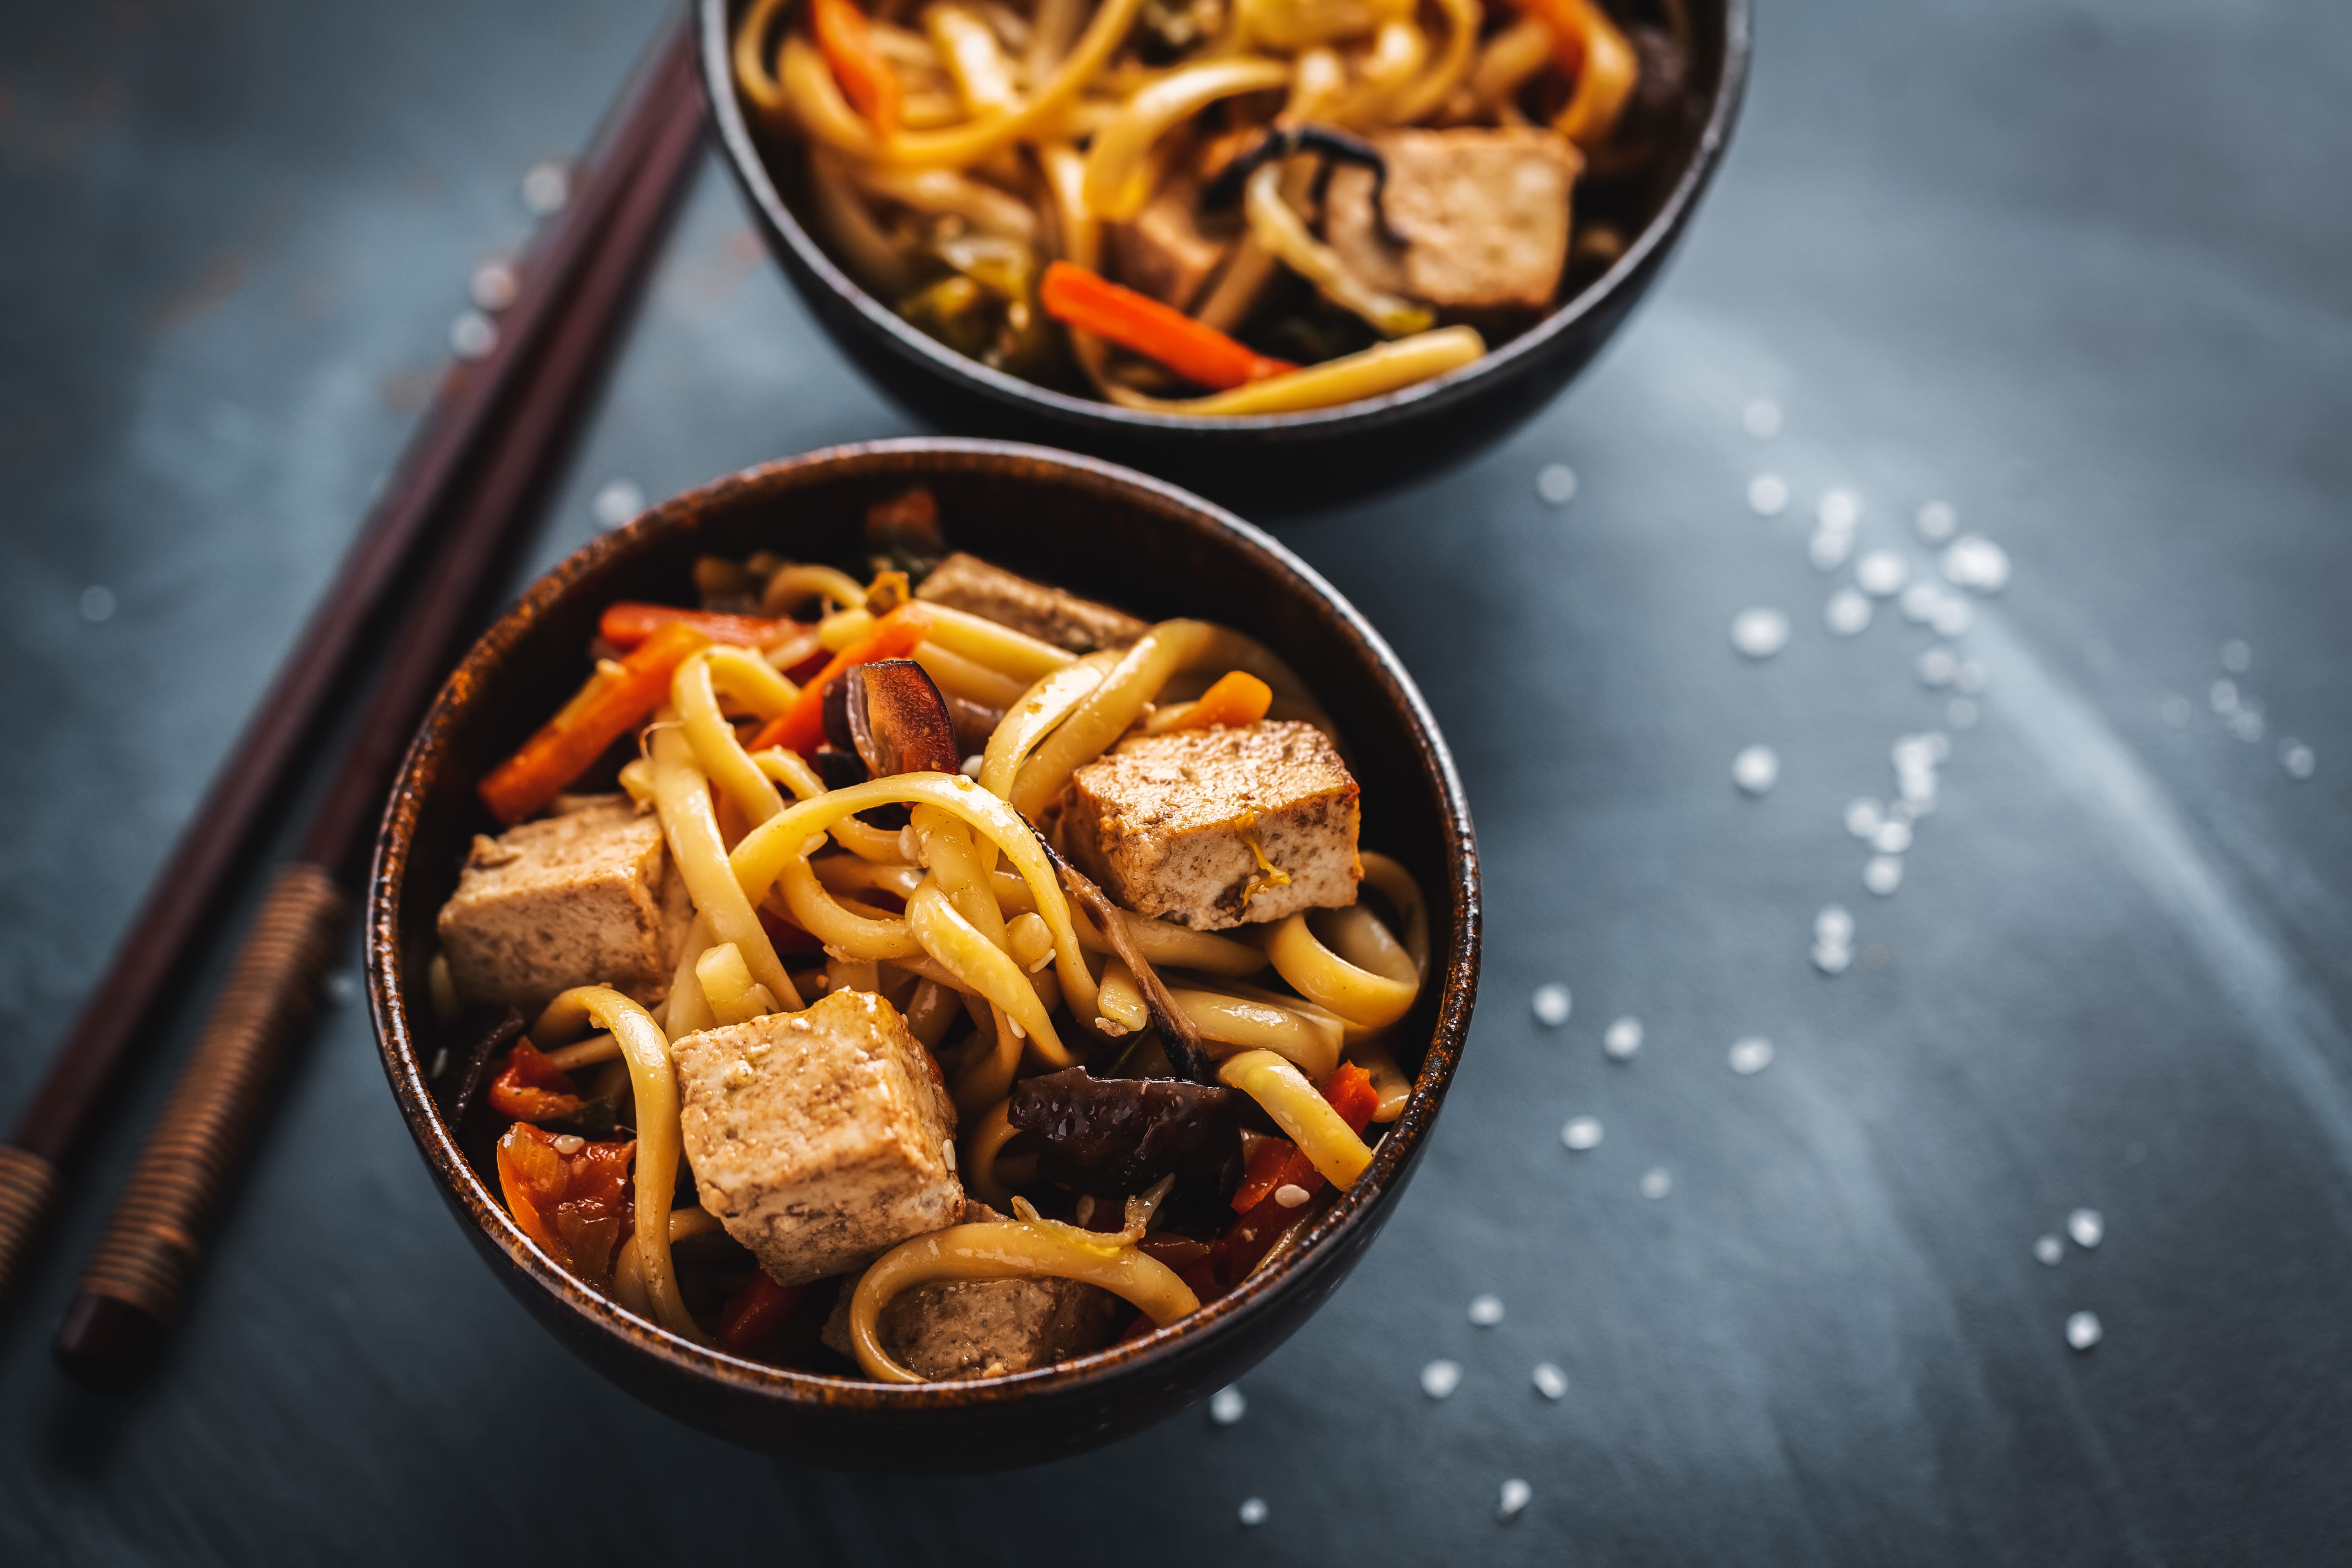 tasty-asian-noodles-with-cheese-tofu-vegetables-bowls-min.jpg